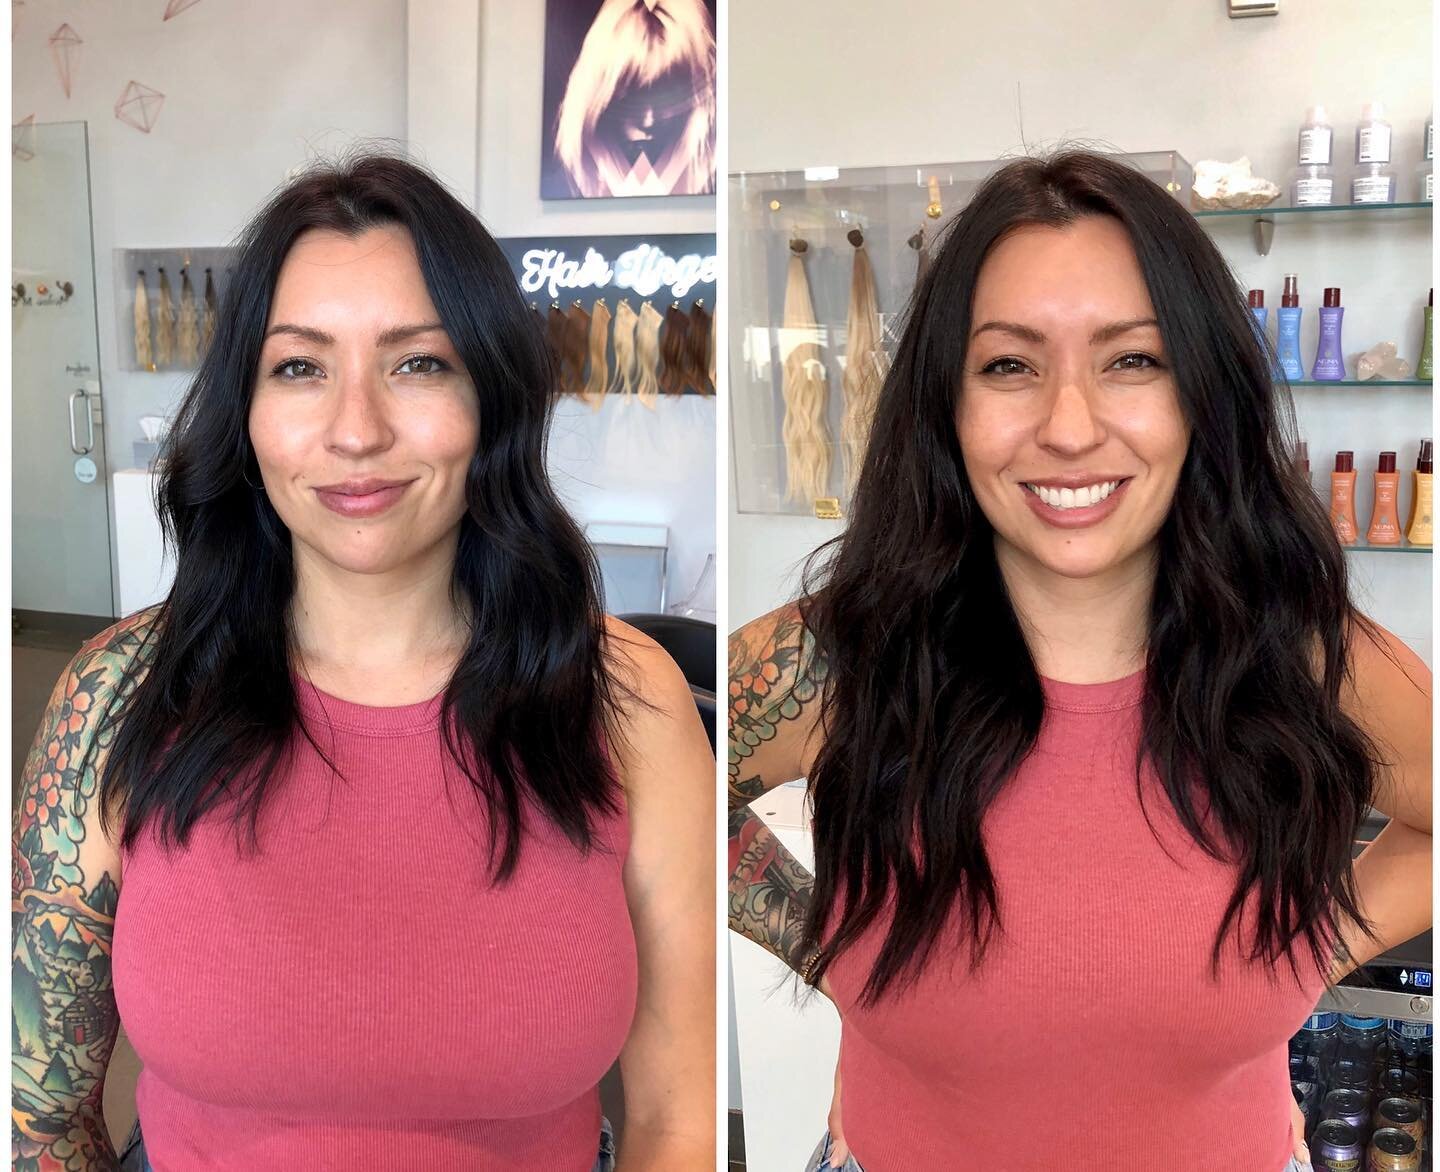 Such a wonderful powerful woman @mama_of_valor is! We elevated her hair game using @thekaceywelchmethod and @hairlingerie 🙌🏼
I used both methods for her new Length and fullness! 

That smile you get with a new look! 🌟
Message me direct for more in